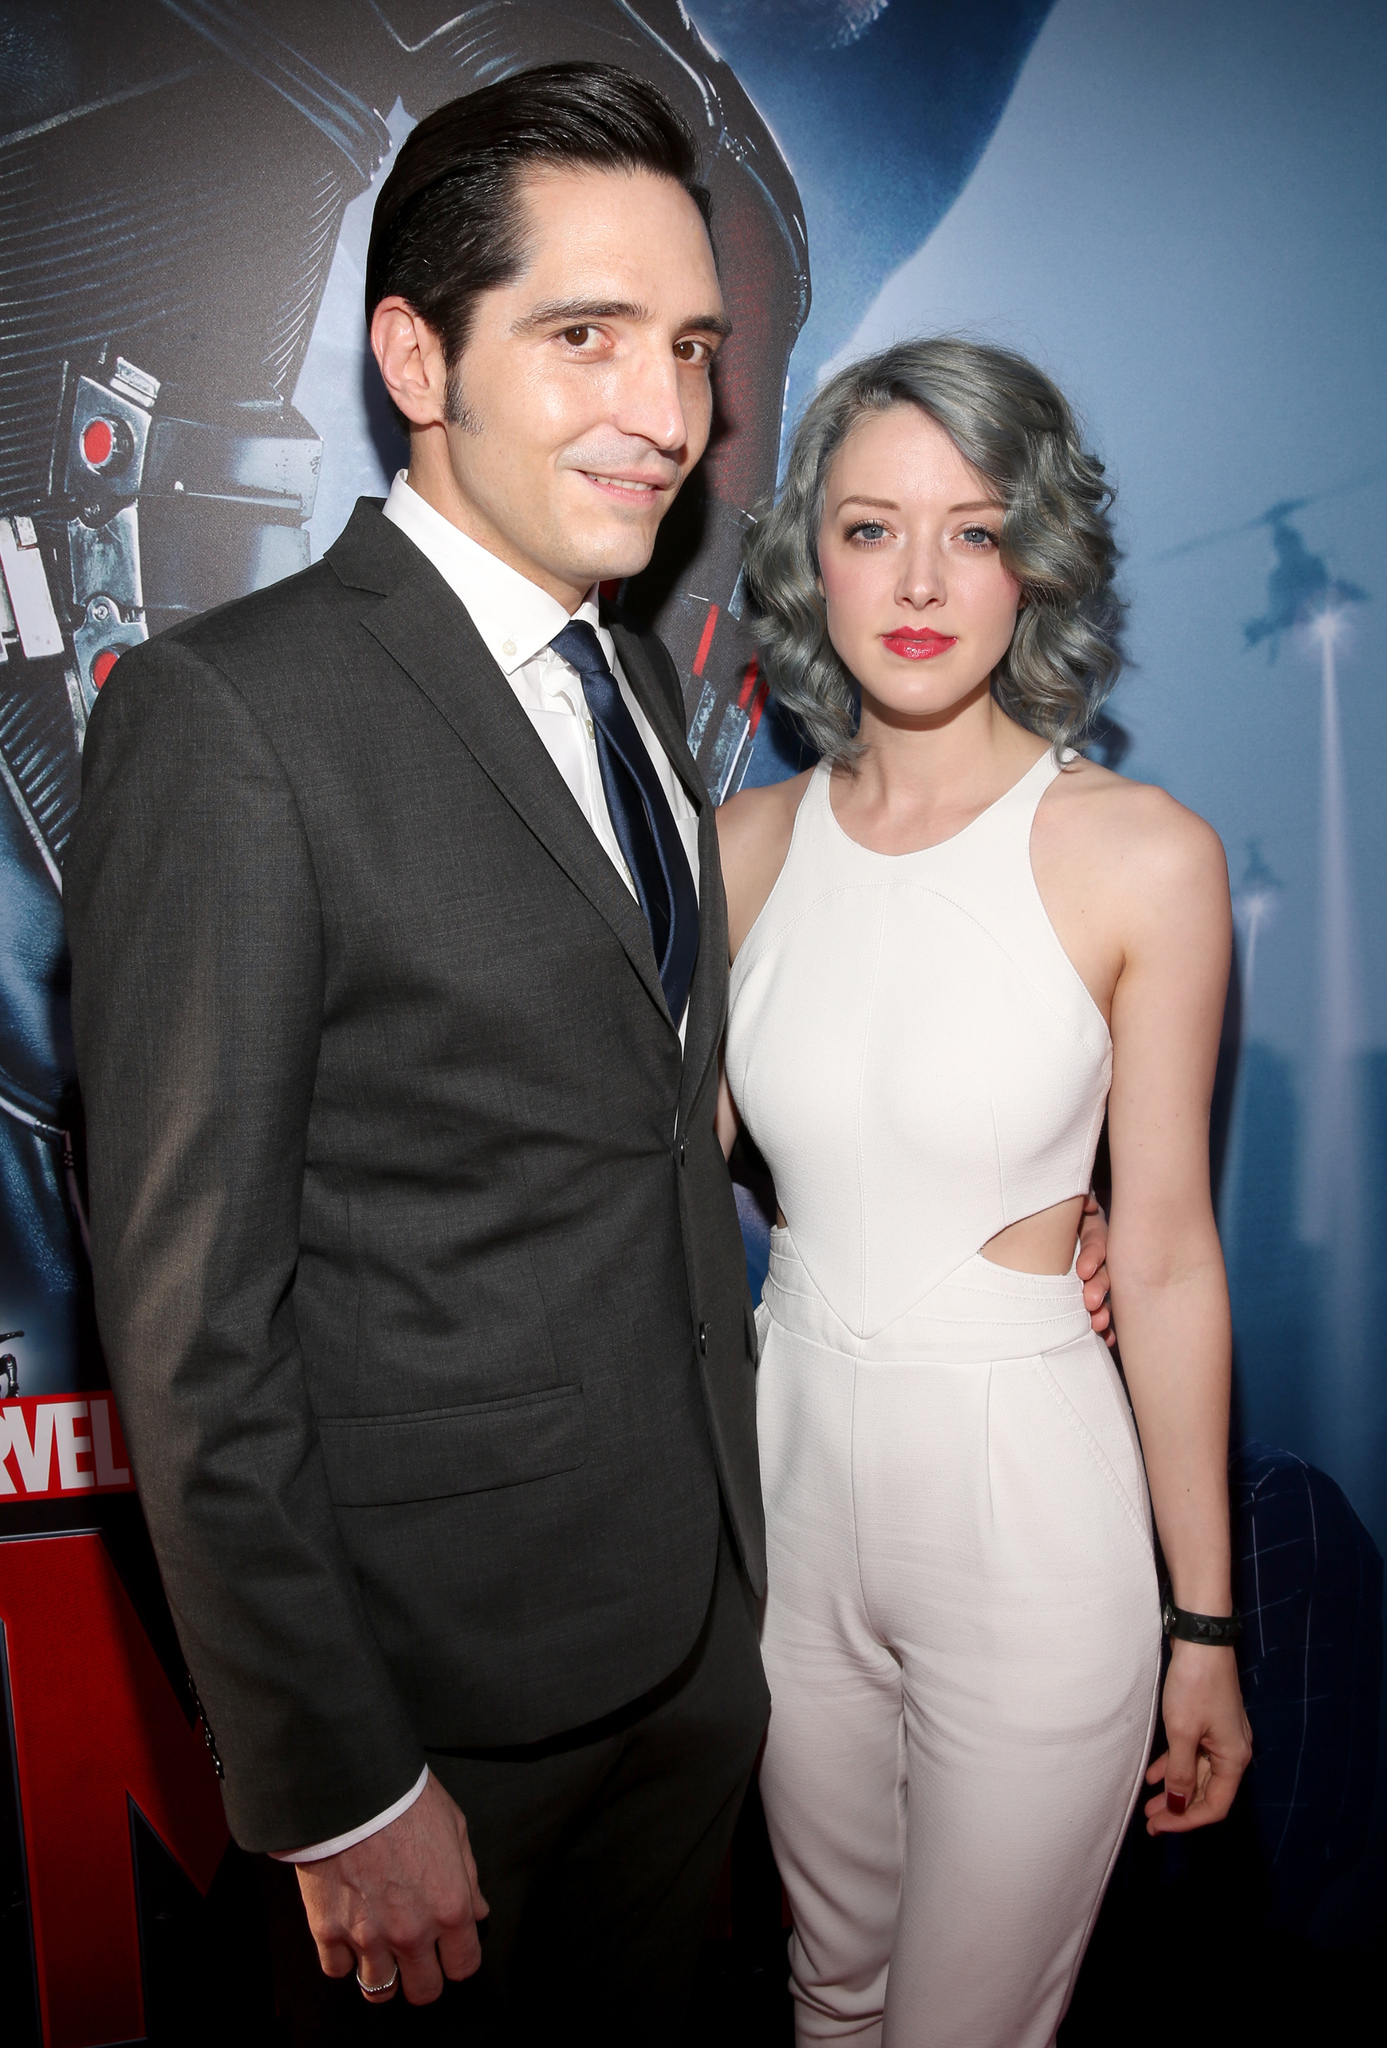 David Dastmalchian and Evelyn Leigh at event of Skruzdeliukas (2015)